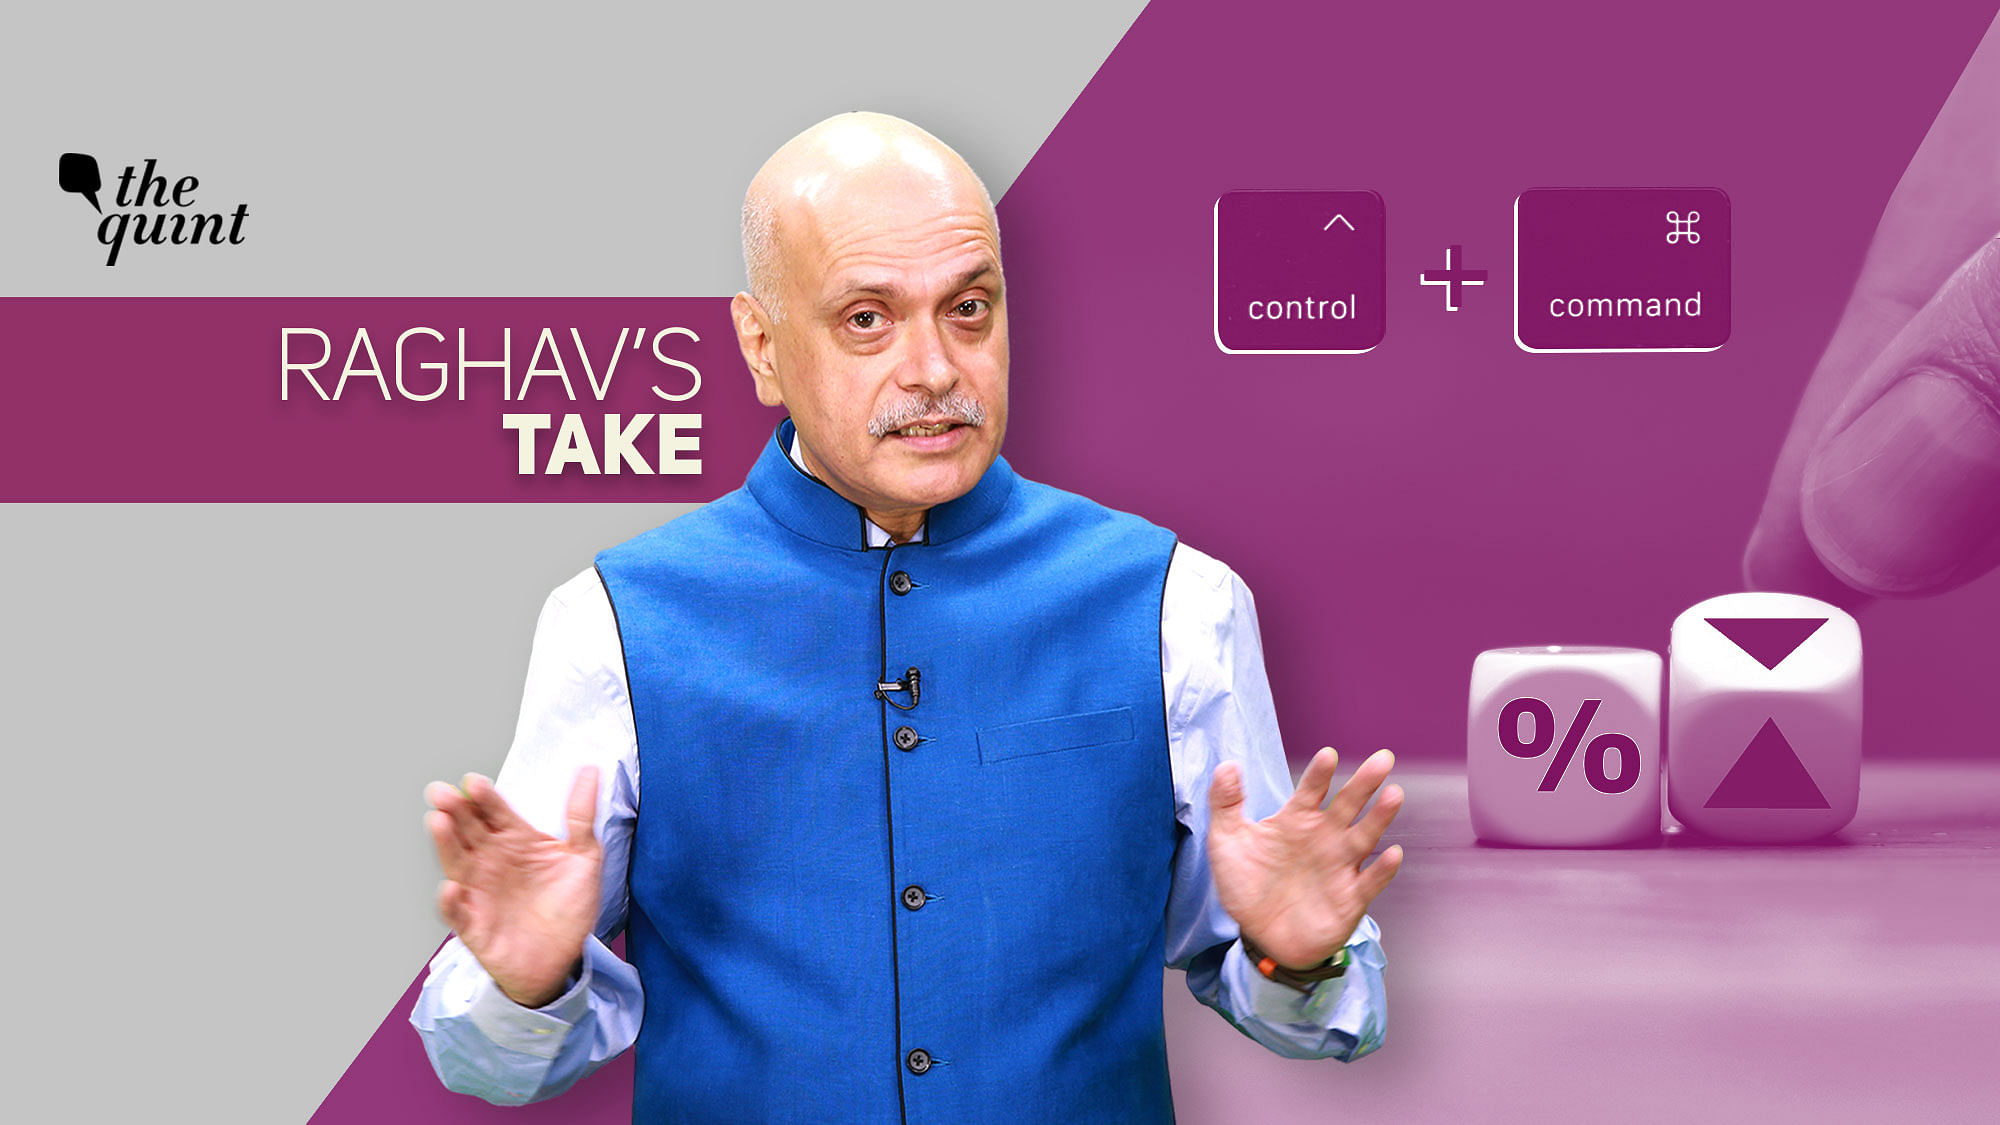 Image of The Quint’s Founder-Editor Raghav Bahl used for representational purposes.